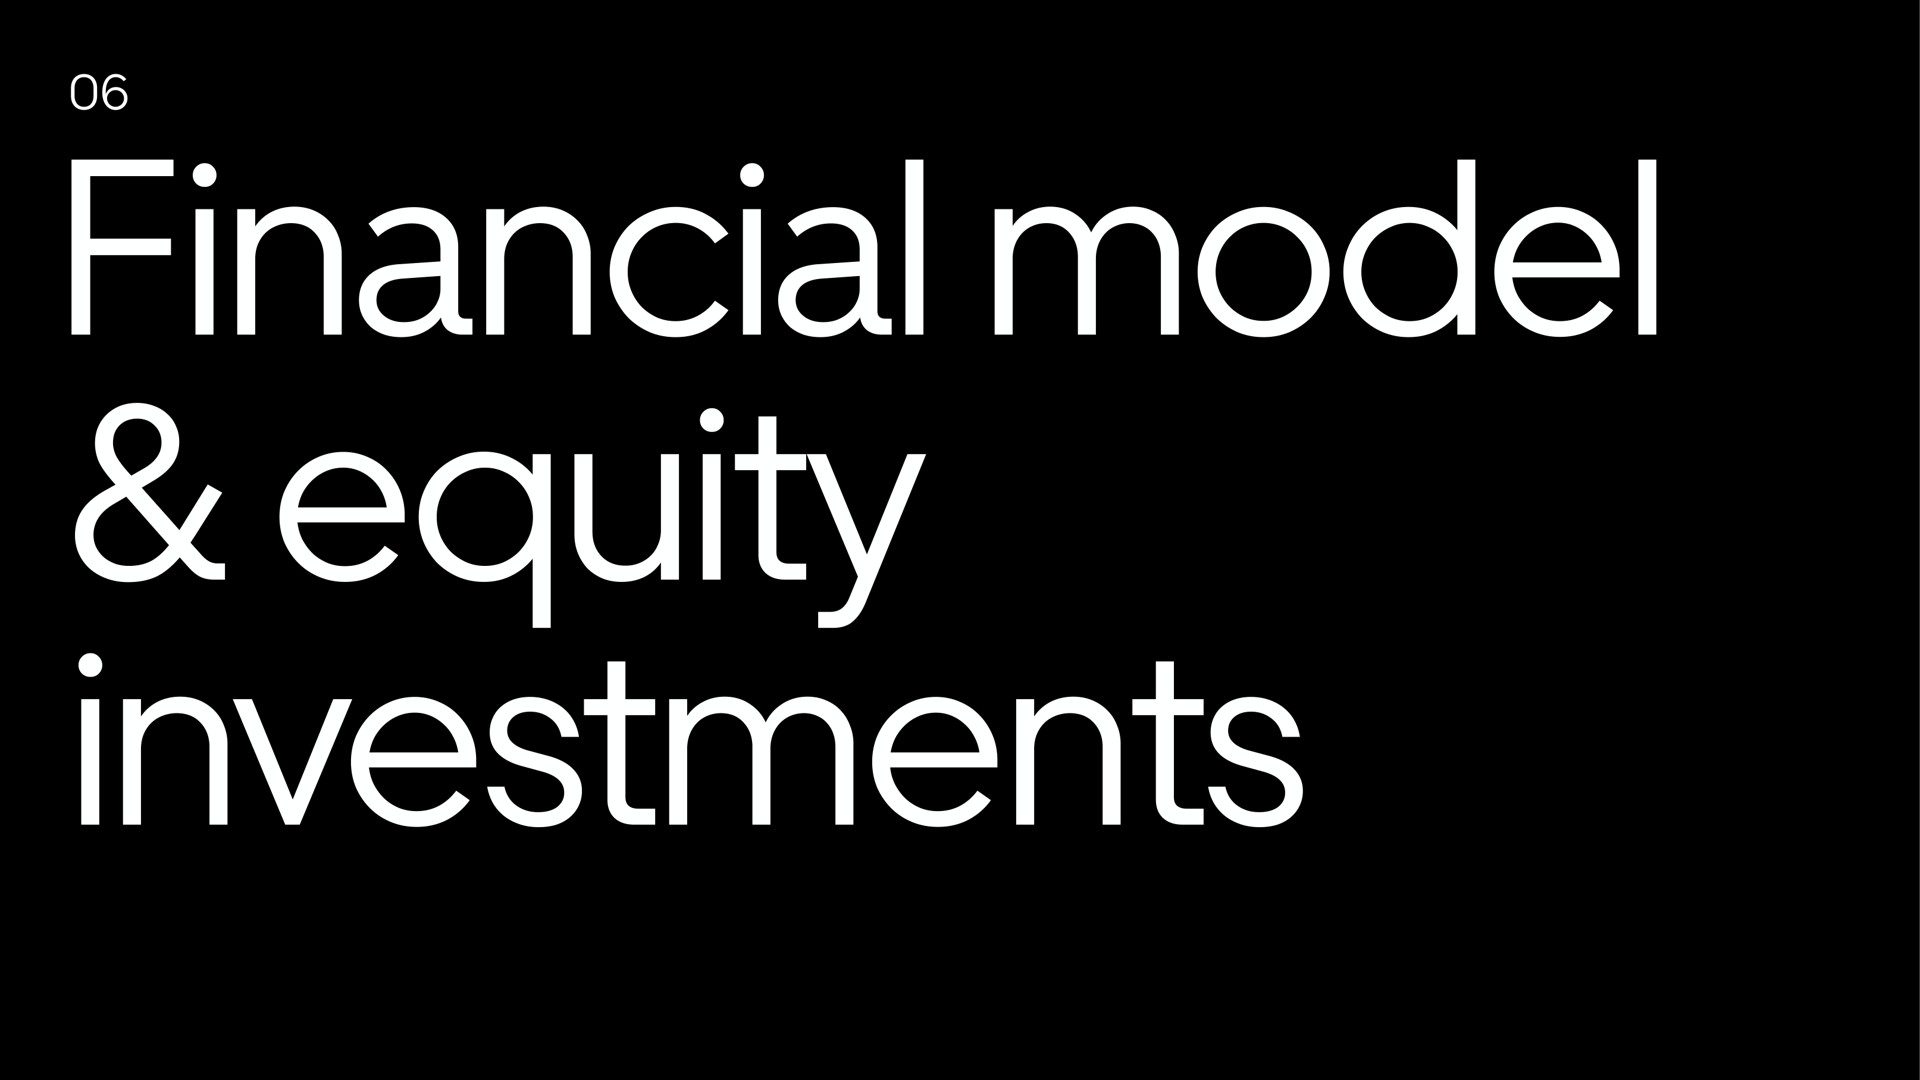 financial model equity investments | Uber